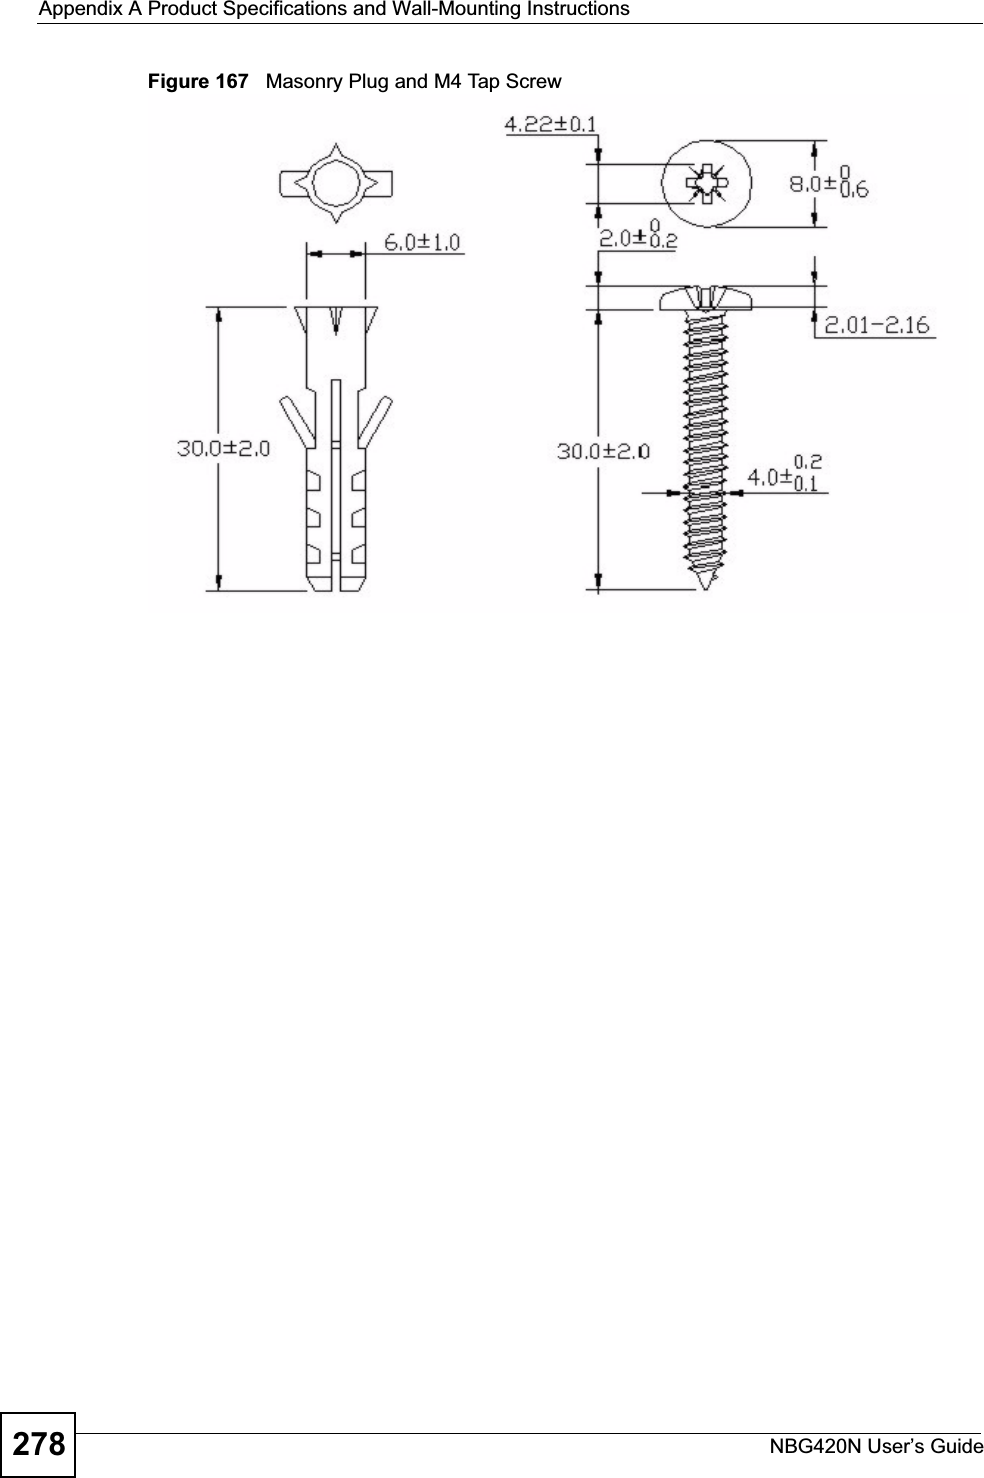 Appendix A Product Specifications and Wall-Mounting InstructionsNBG420N User’s Guide278Figure 167   Masonry Plug and M4 Tap Screw